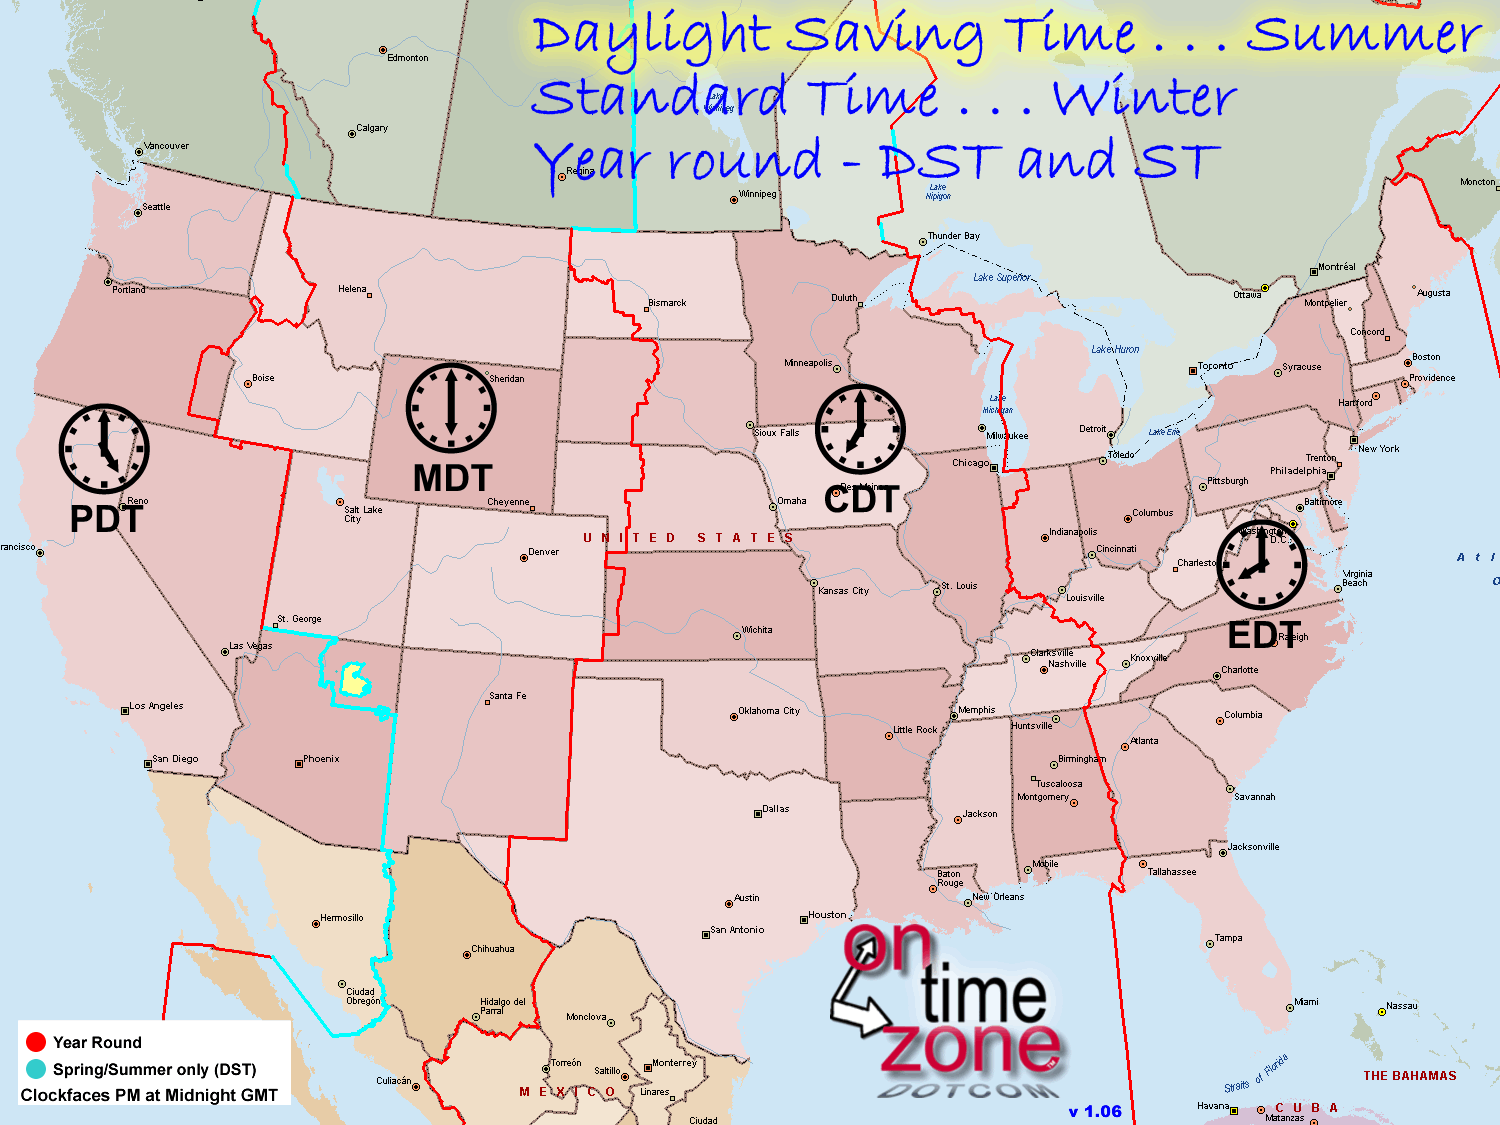 Time zones for the USA and North America